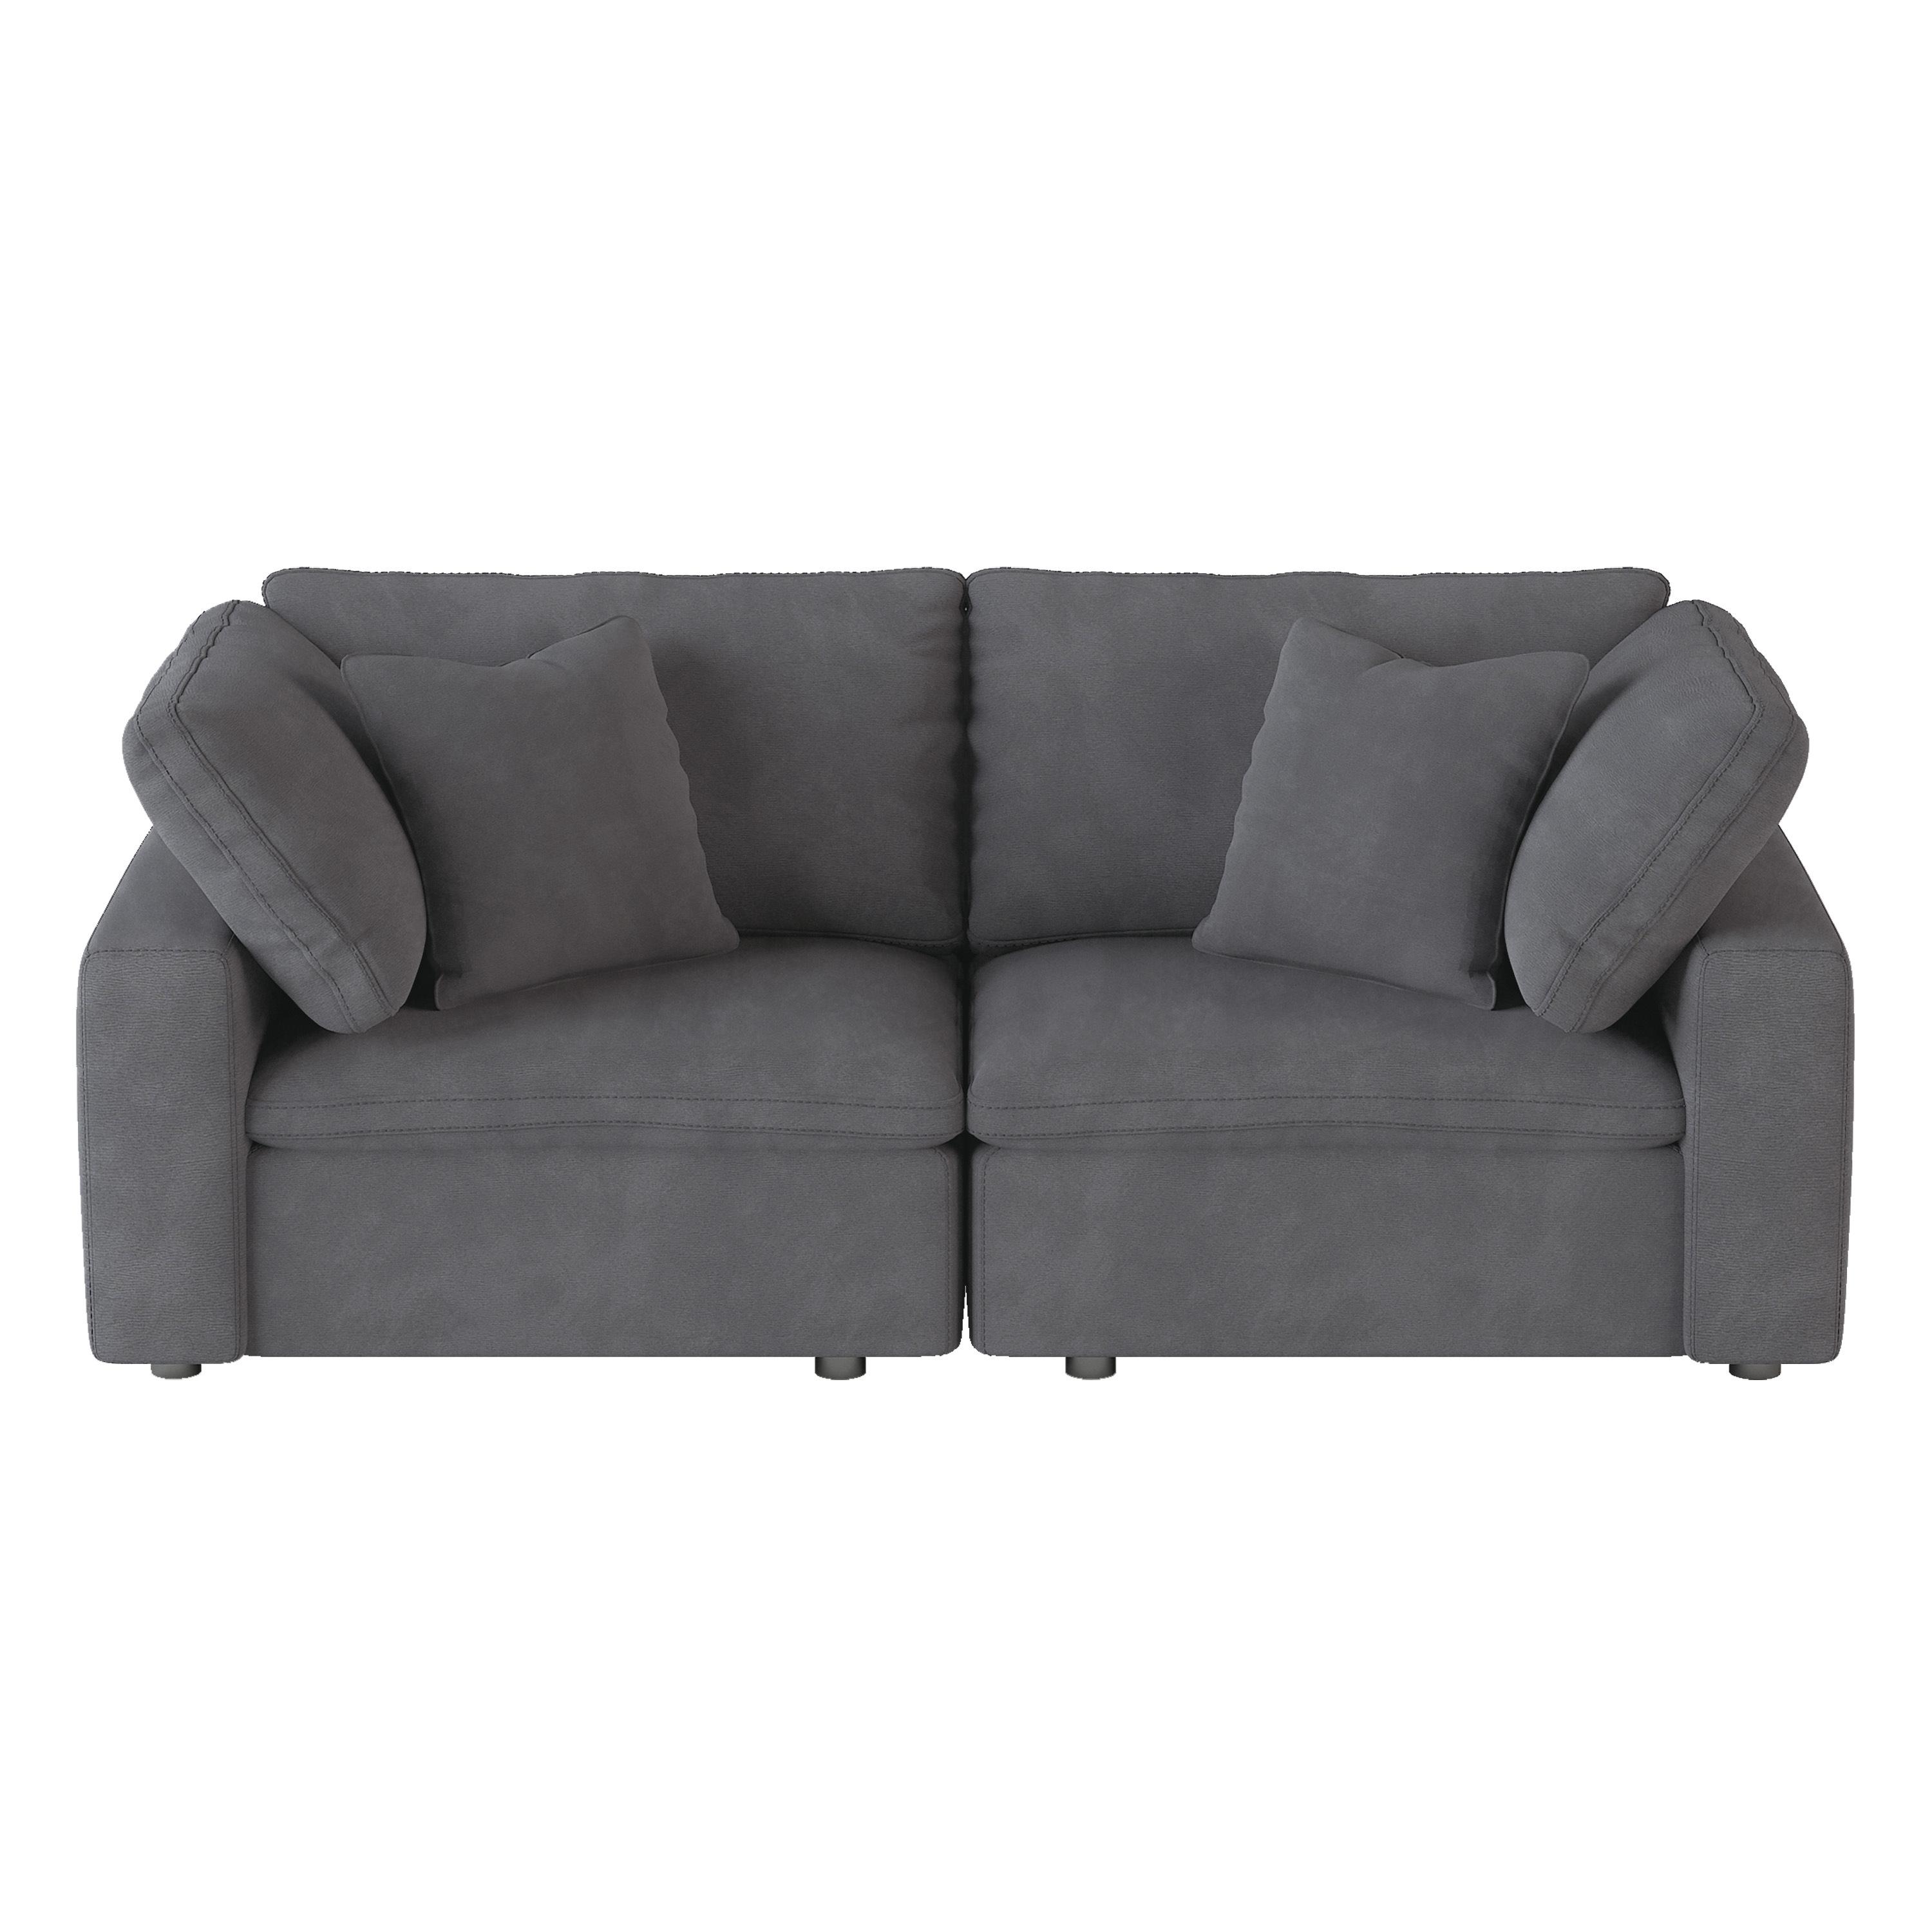 Transitional Loveseat 9546GY-2* Guthrie 9546GY-2* in Gray Microfiber